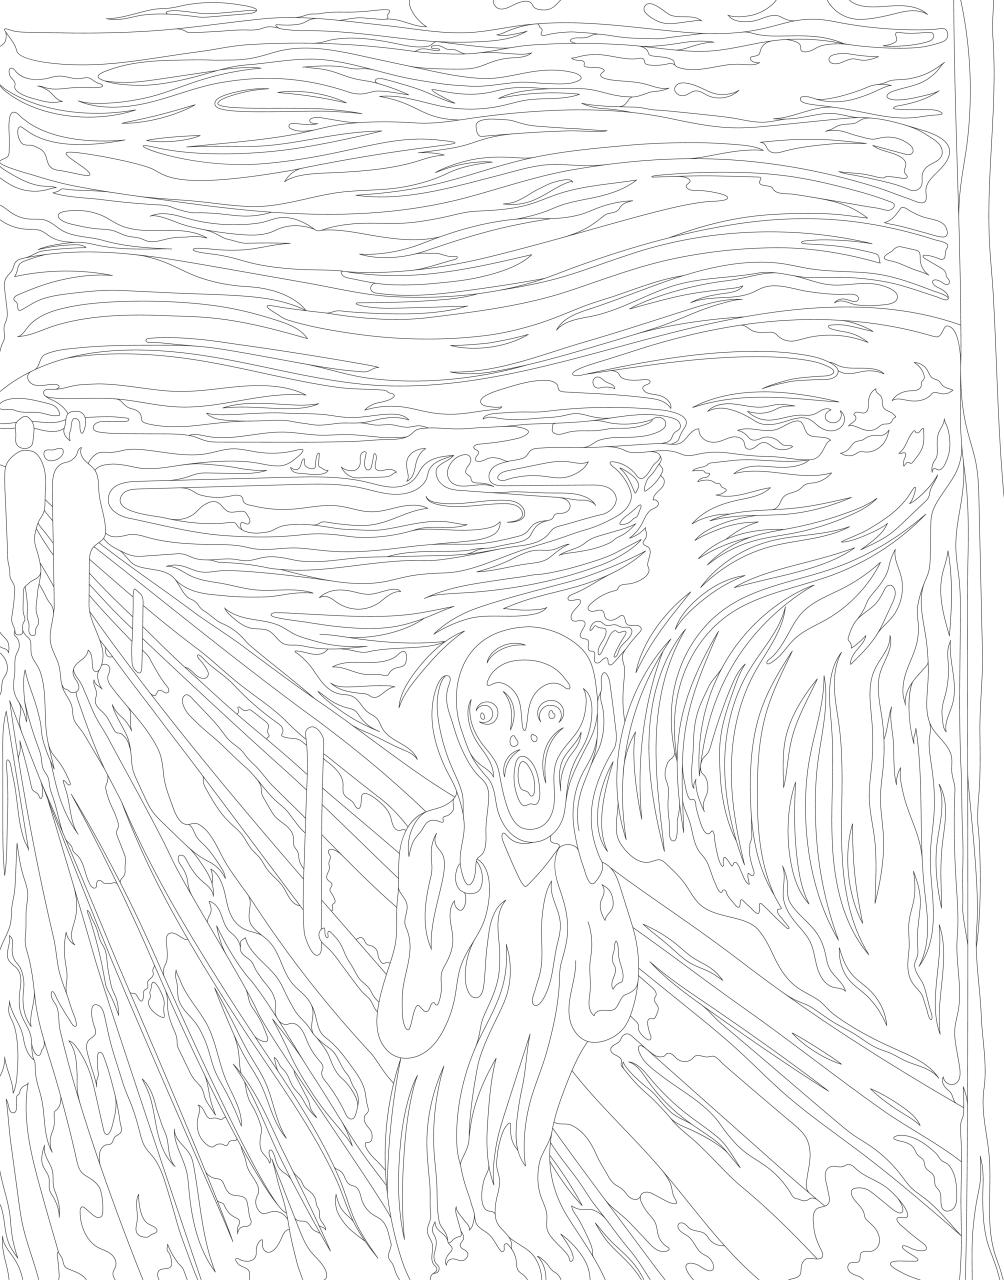 The Scream (1893) by Edvard Munch adult coloring page Download Free